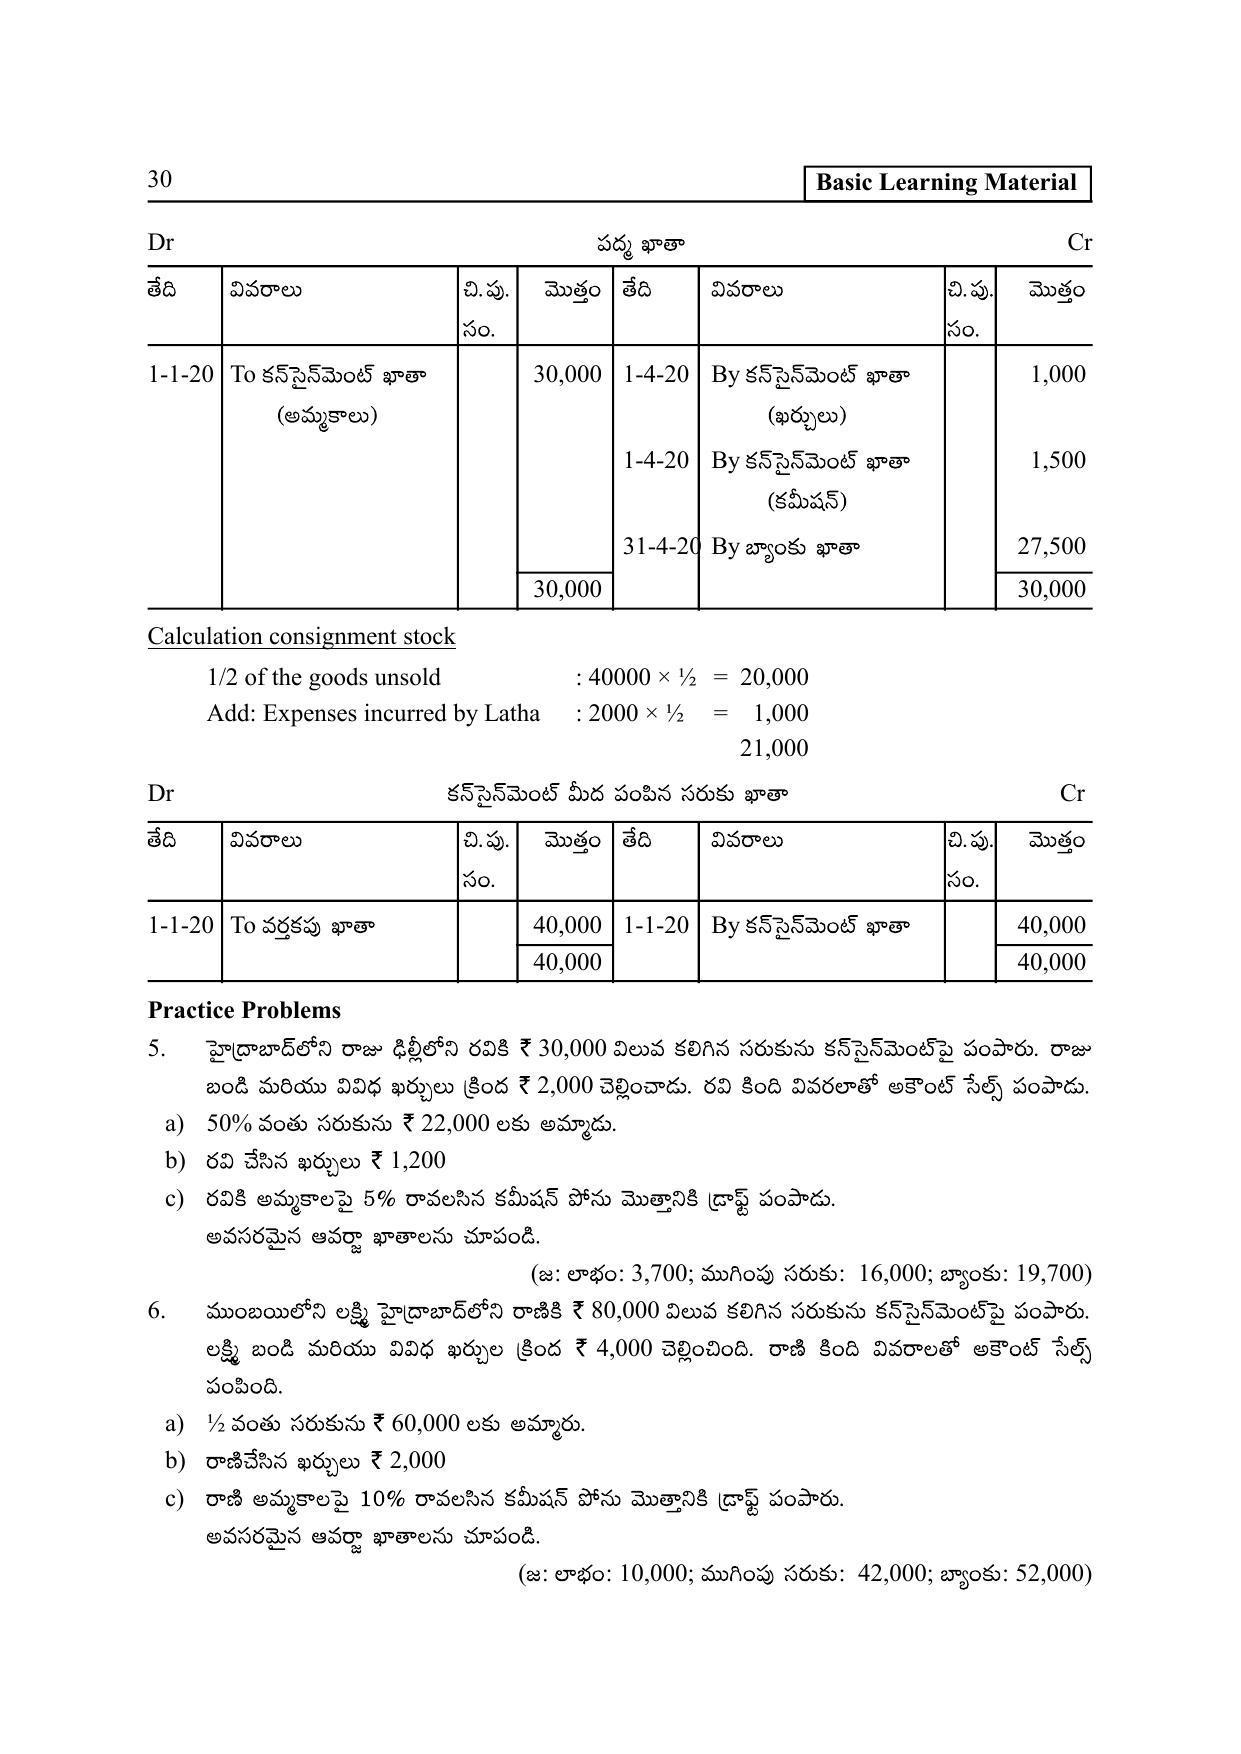 TS SCERT Inter 2nd Year Commerce &Accts II yr TM Path 1 (Telugu Medium) Text Book - Page 35